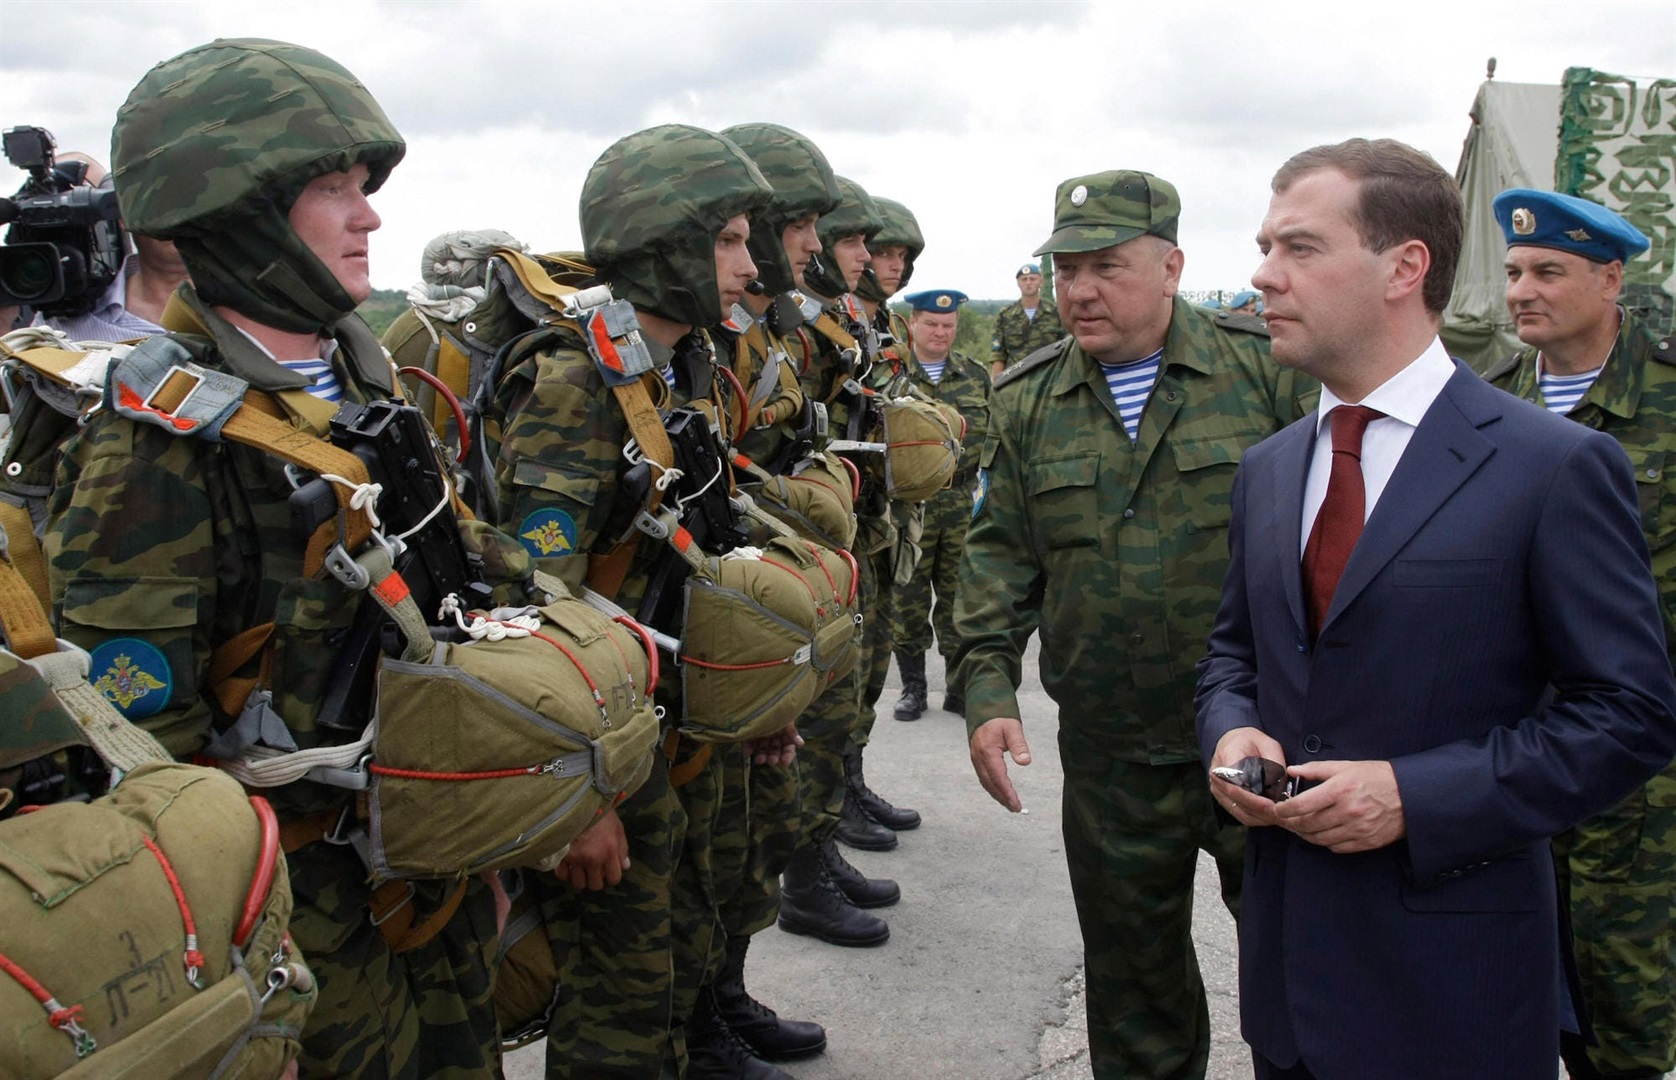 Russian President Dmitry Medvedev and Airborne Troops commander Vladimir Shamanov, third from right, meet Airborne soldiers in Novorossiysk, Russia, July 14, 2009.